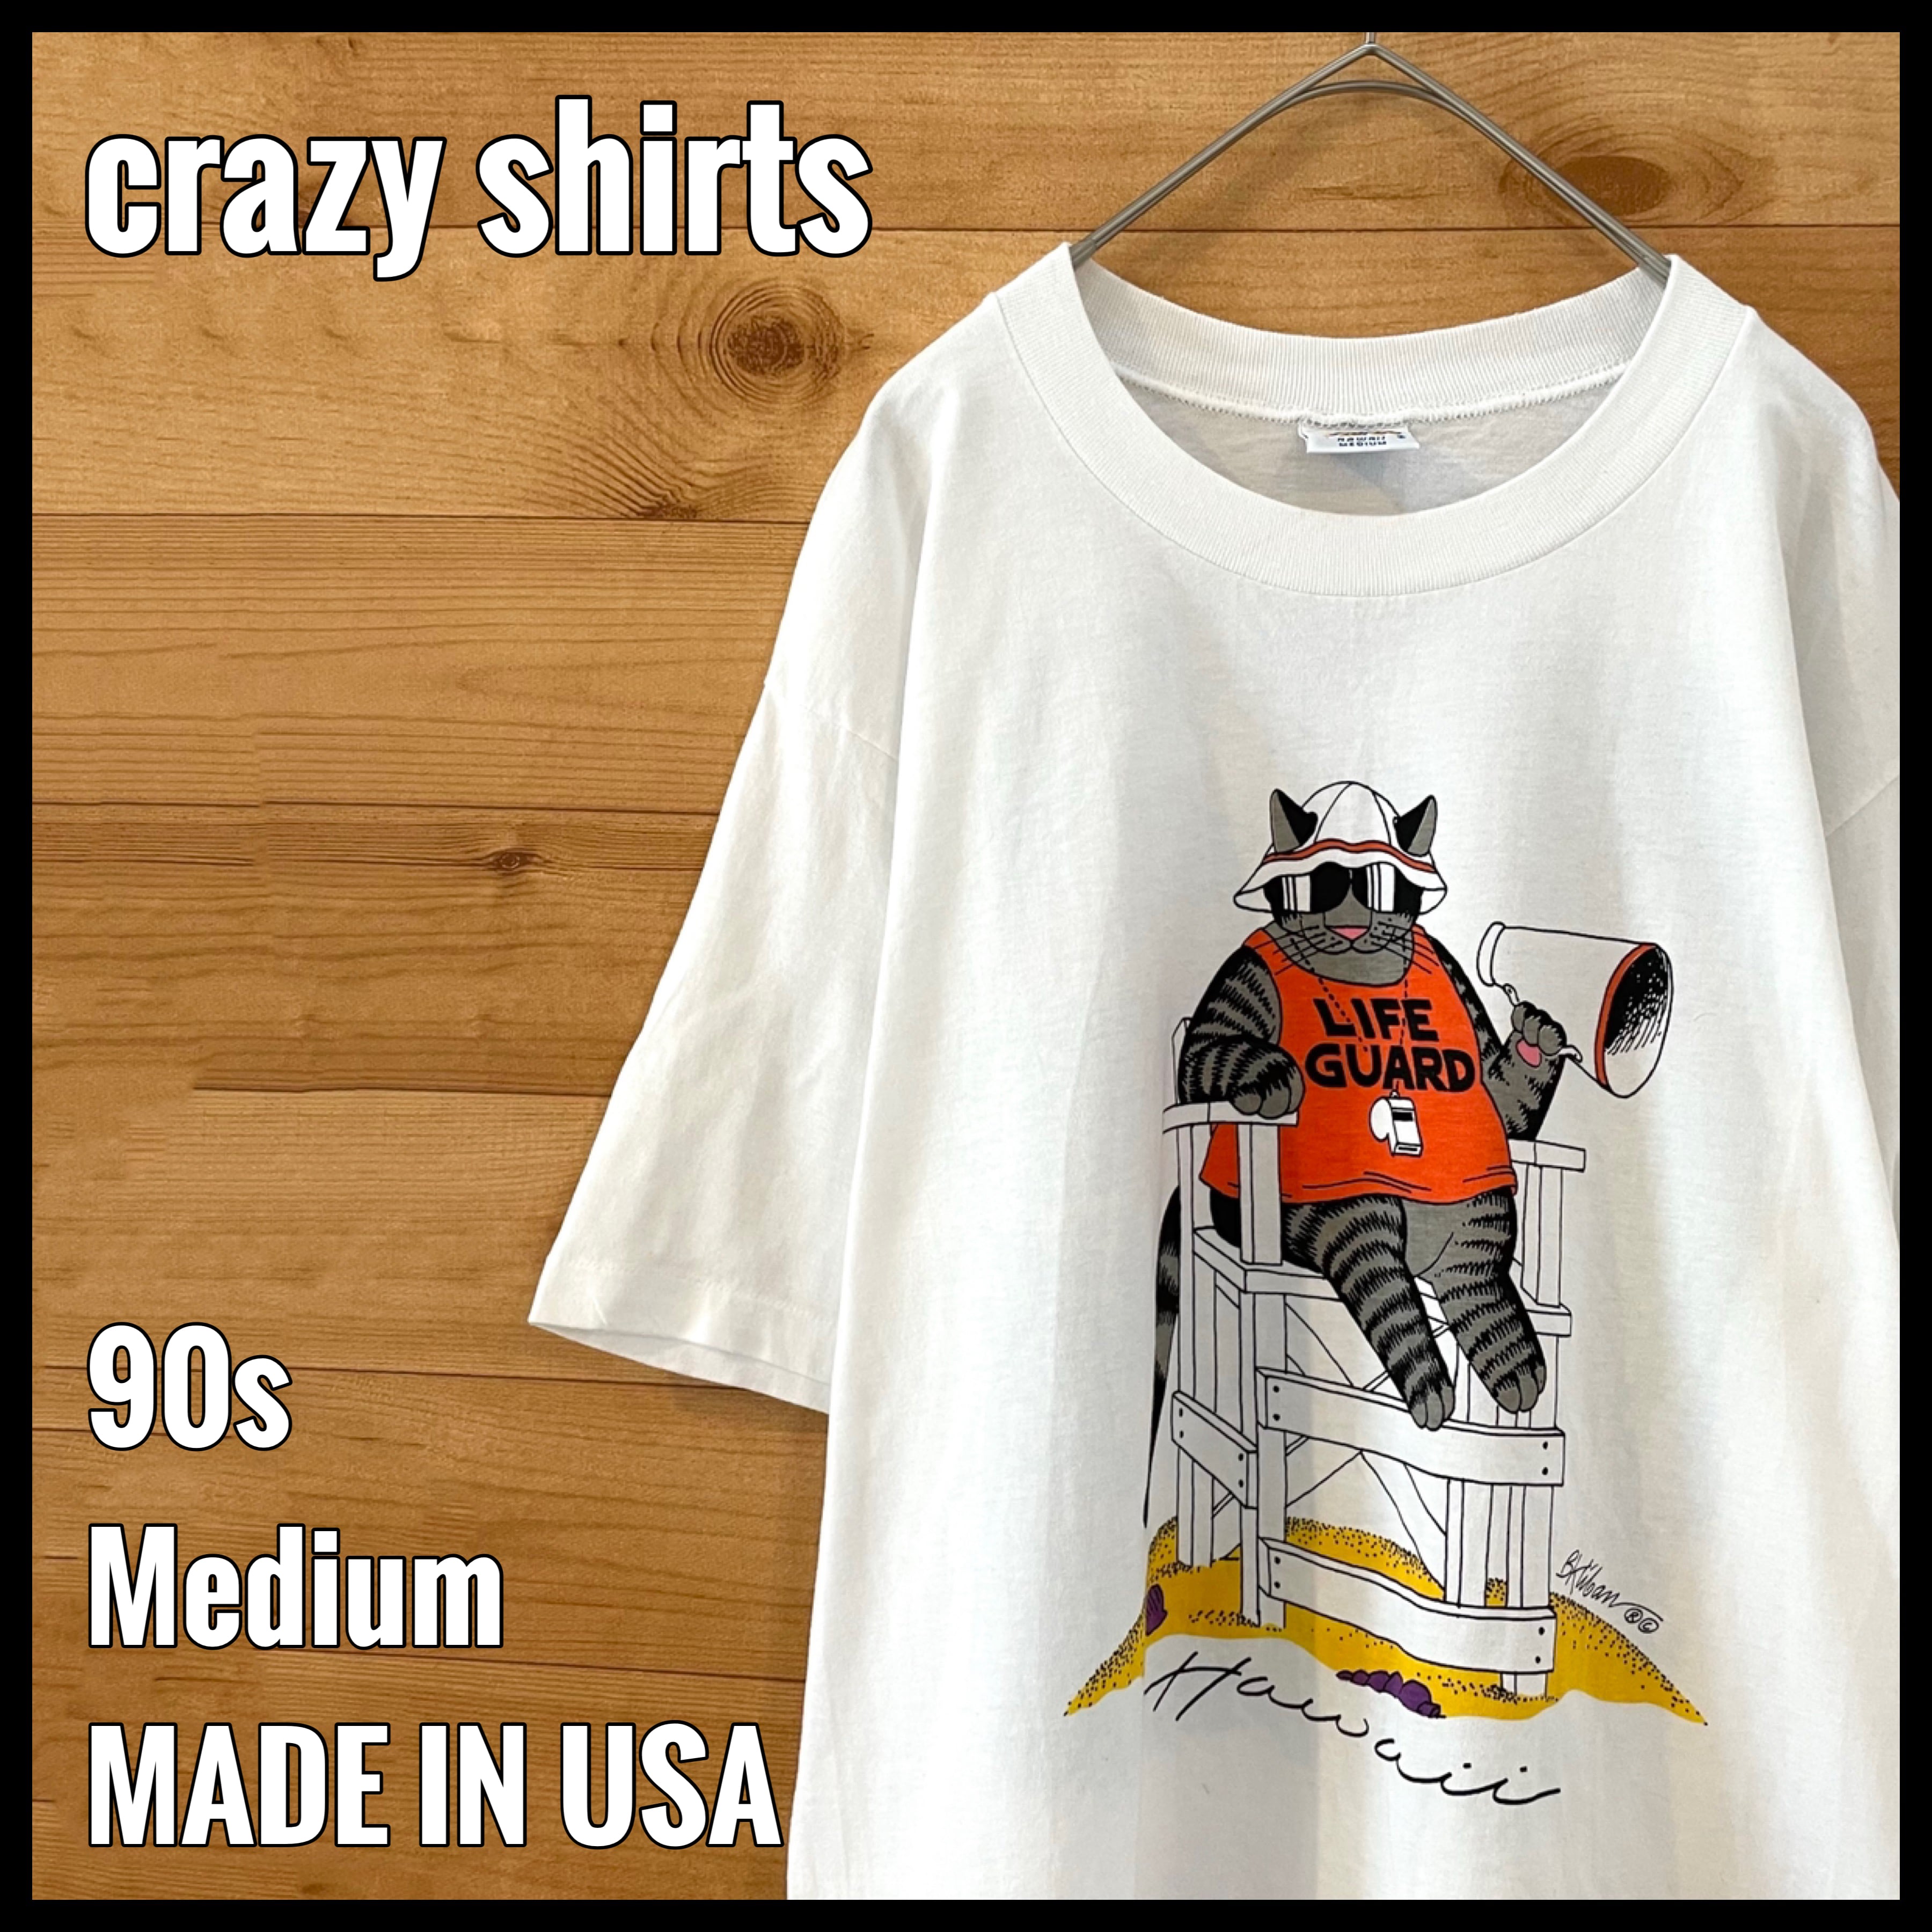 crazy shirts】90s USA製 Tシャツ 両面プリント シングルステッチ ヴィンテージ クレイジーシャツ us古着  古着屋手ぶらがbest